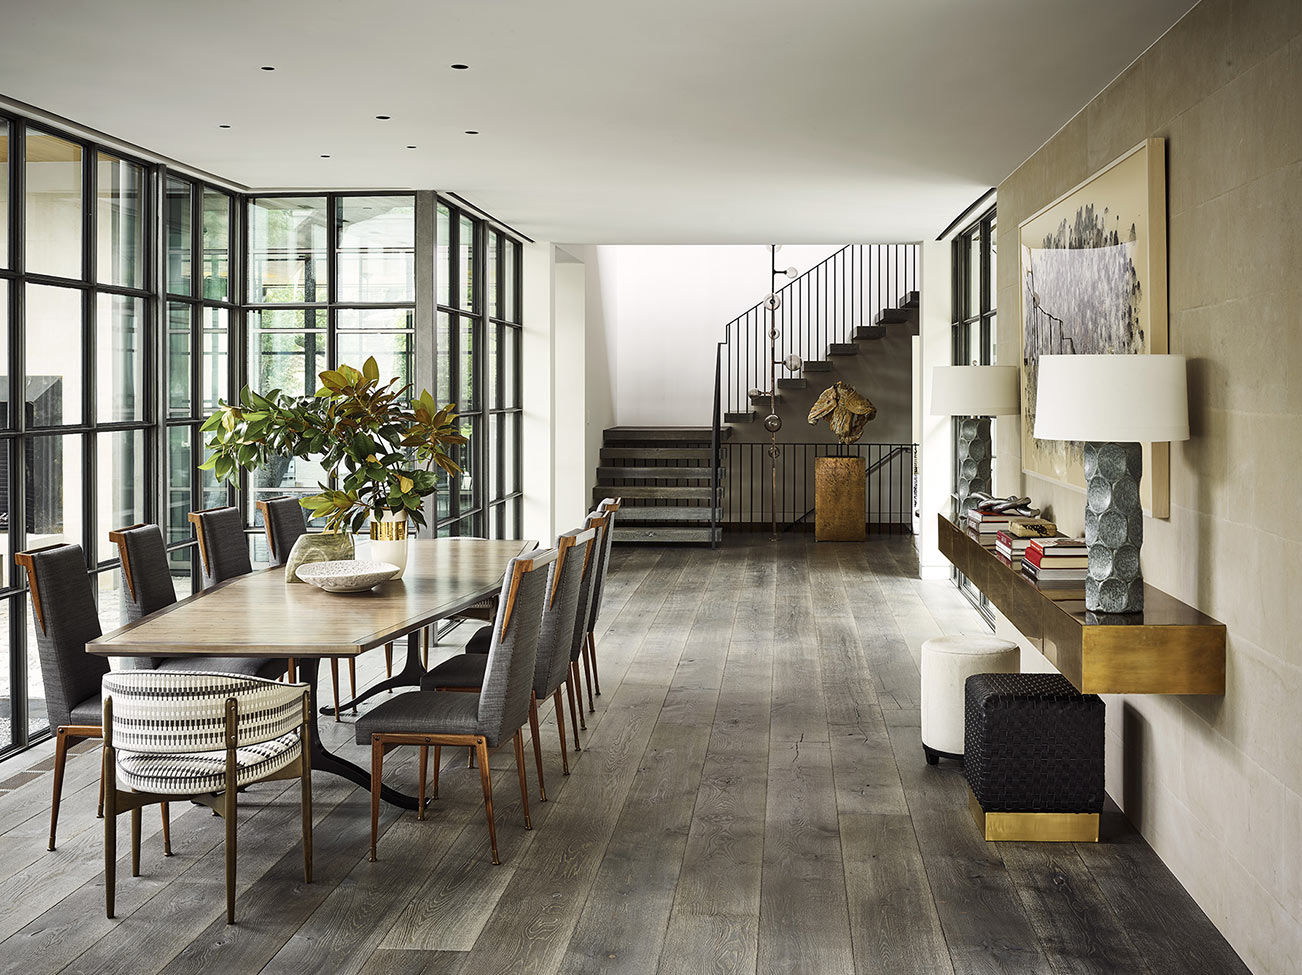 Dining room with gray wood floors, floor-to-ceiling metal-paned windows, and elegant staircase.